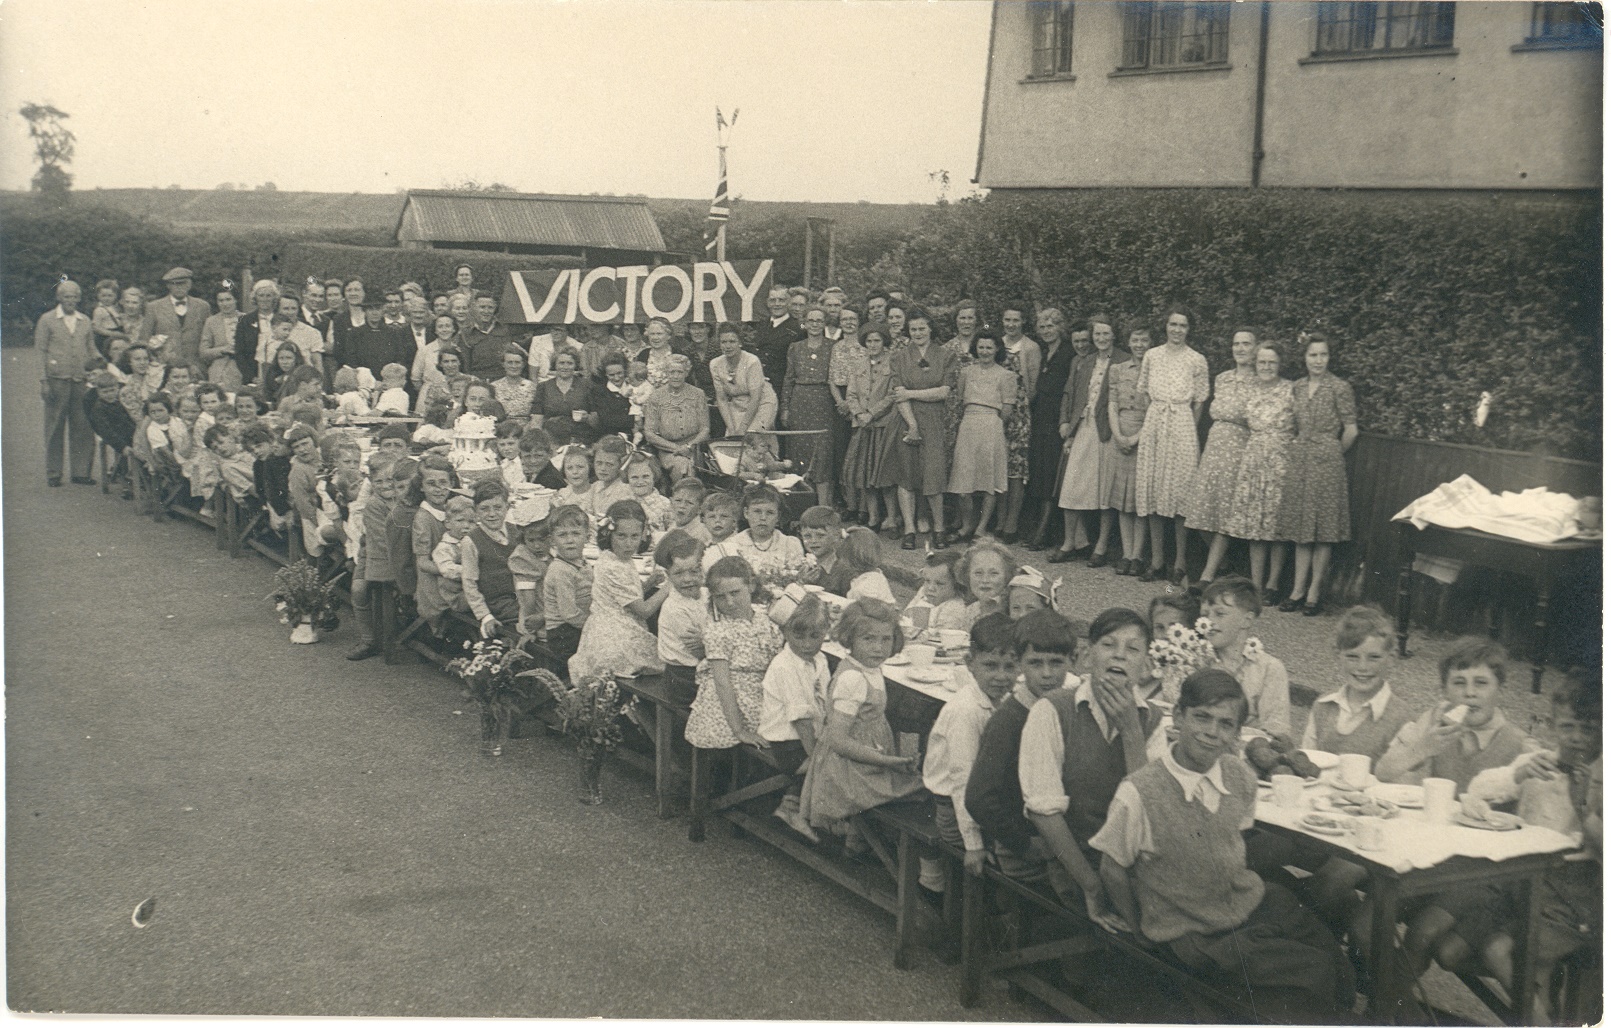 Photograph of Victory celebrations probably in Florence Road, showing a long table with children sitting at it and adults in the background holding a 'VICTORY' banner.